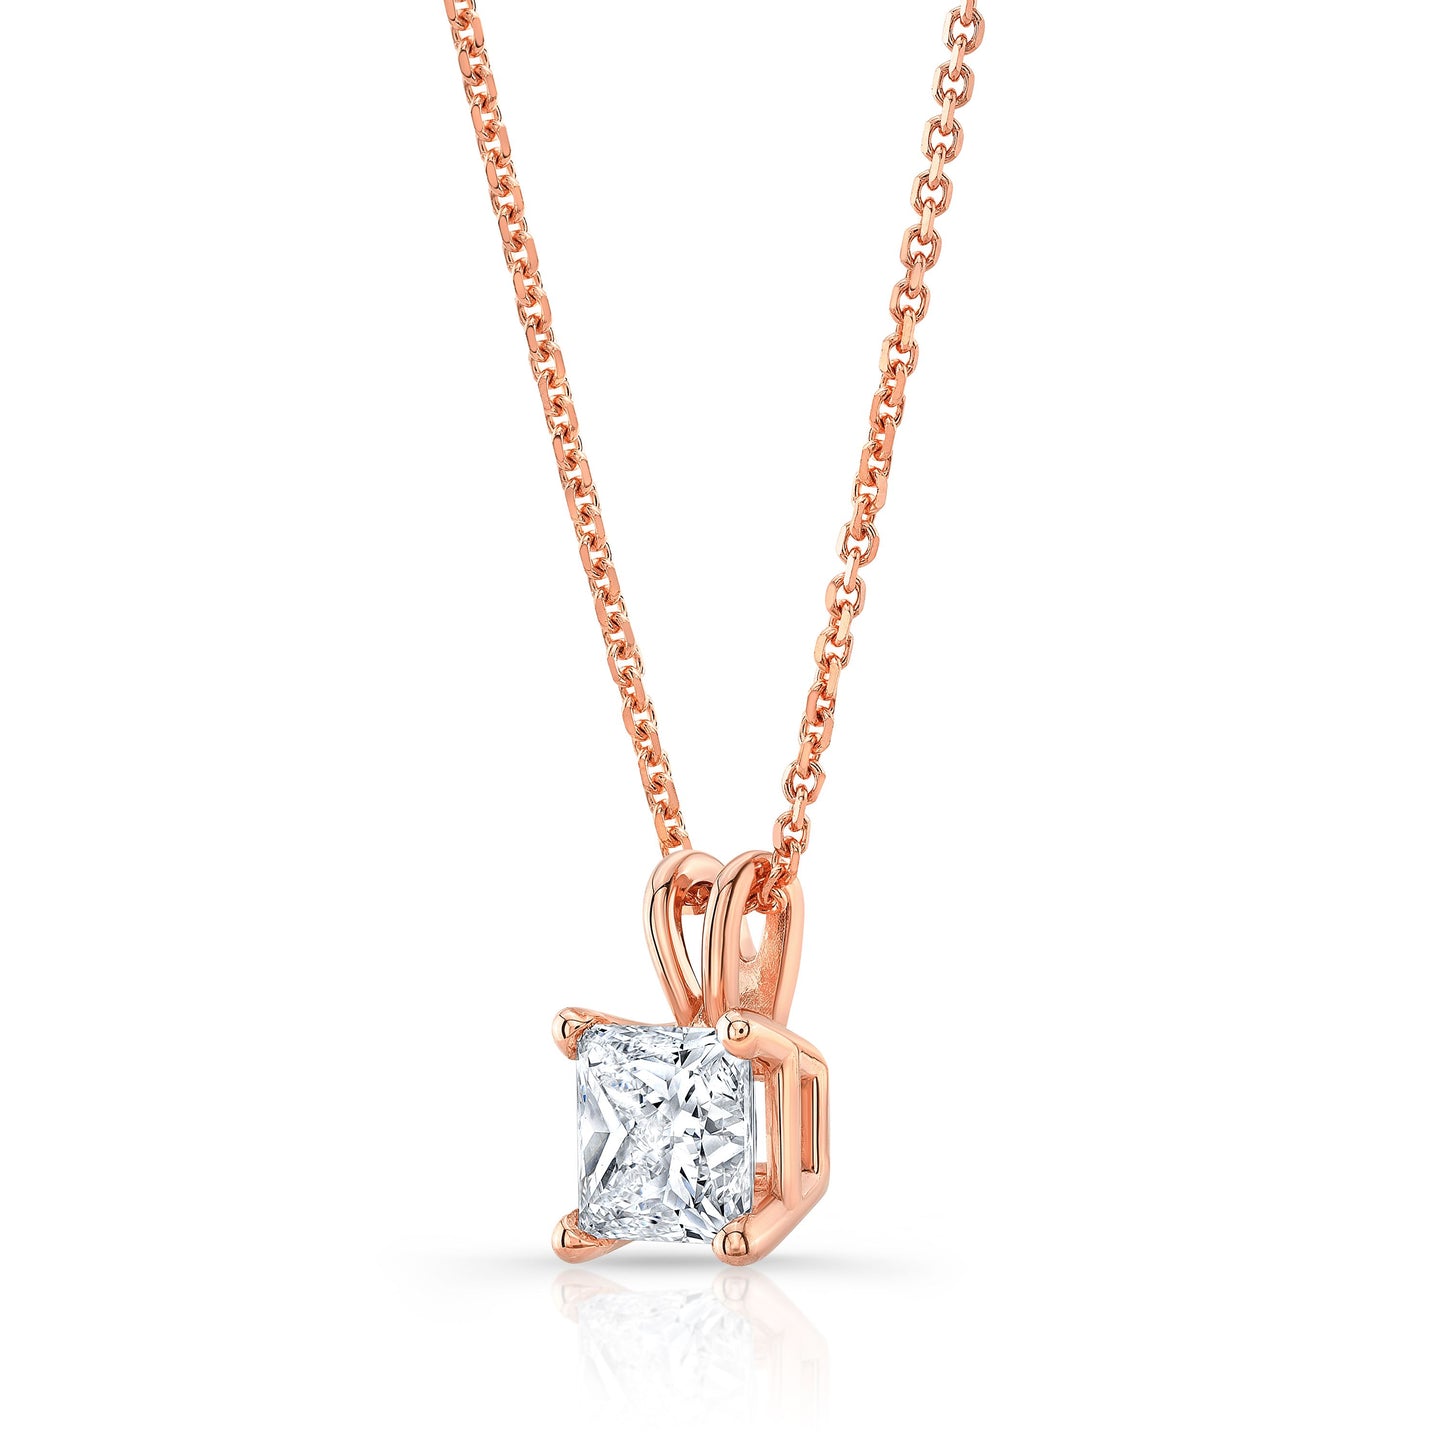 Princess Diamond Solitaire Pendant In A 14k Rose Gold 4-prong Basket Setting, 3.67ct. T.w. (hi, Si1-si2)